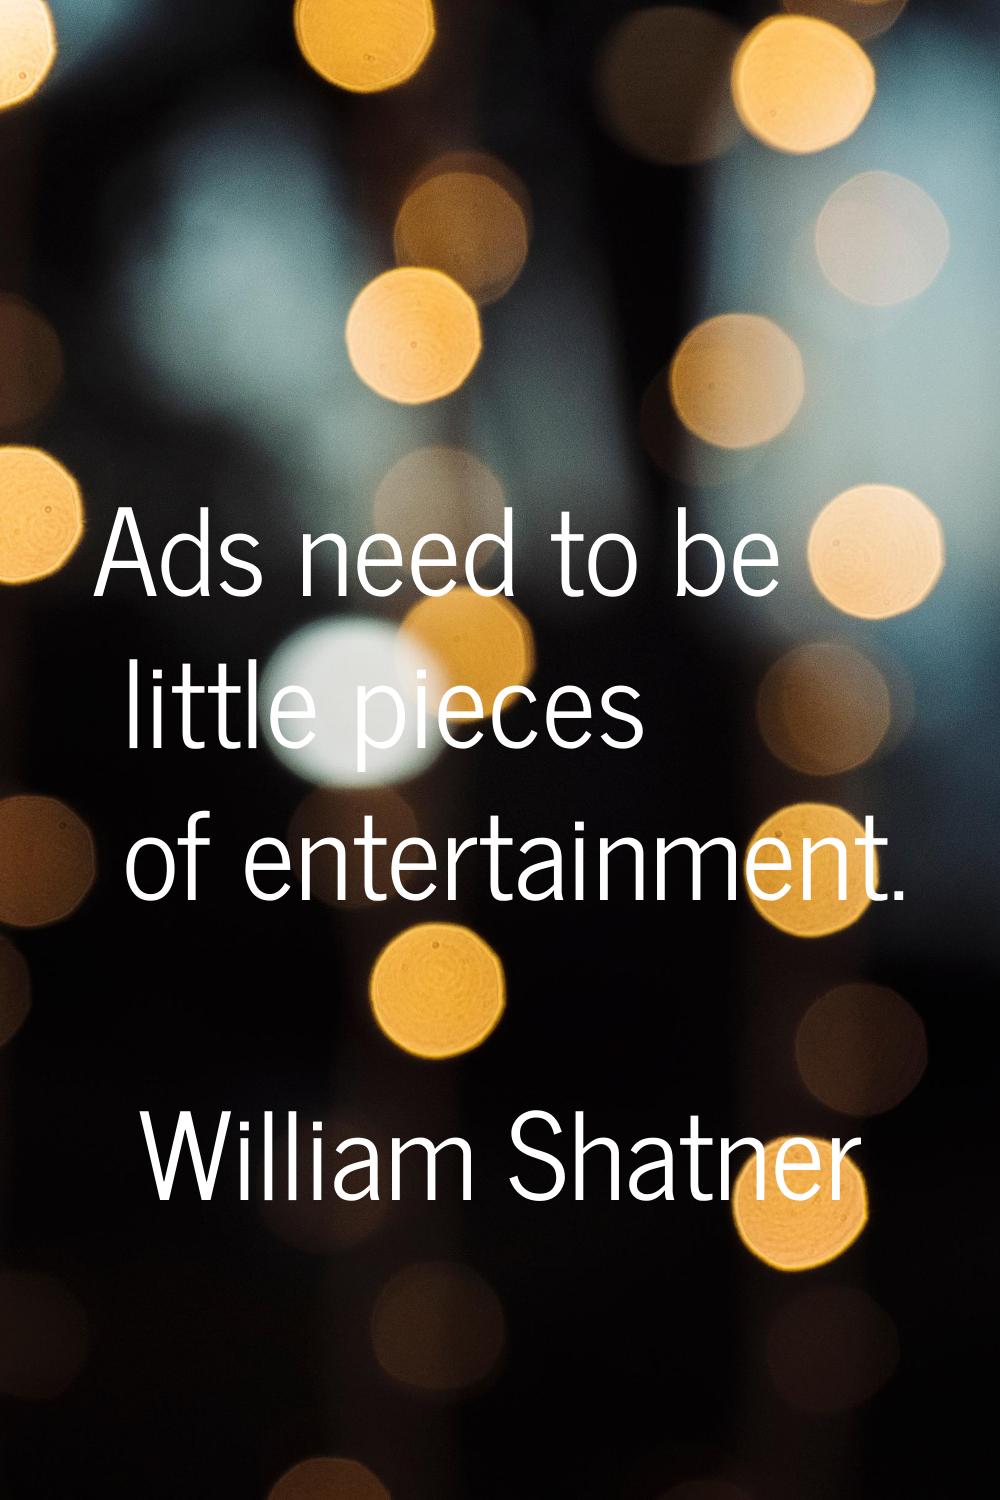 Ads need to be little pieces of entertainment.